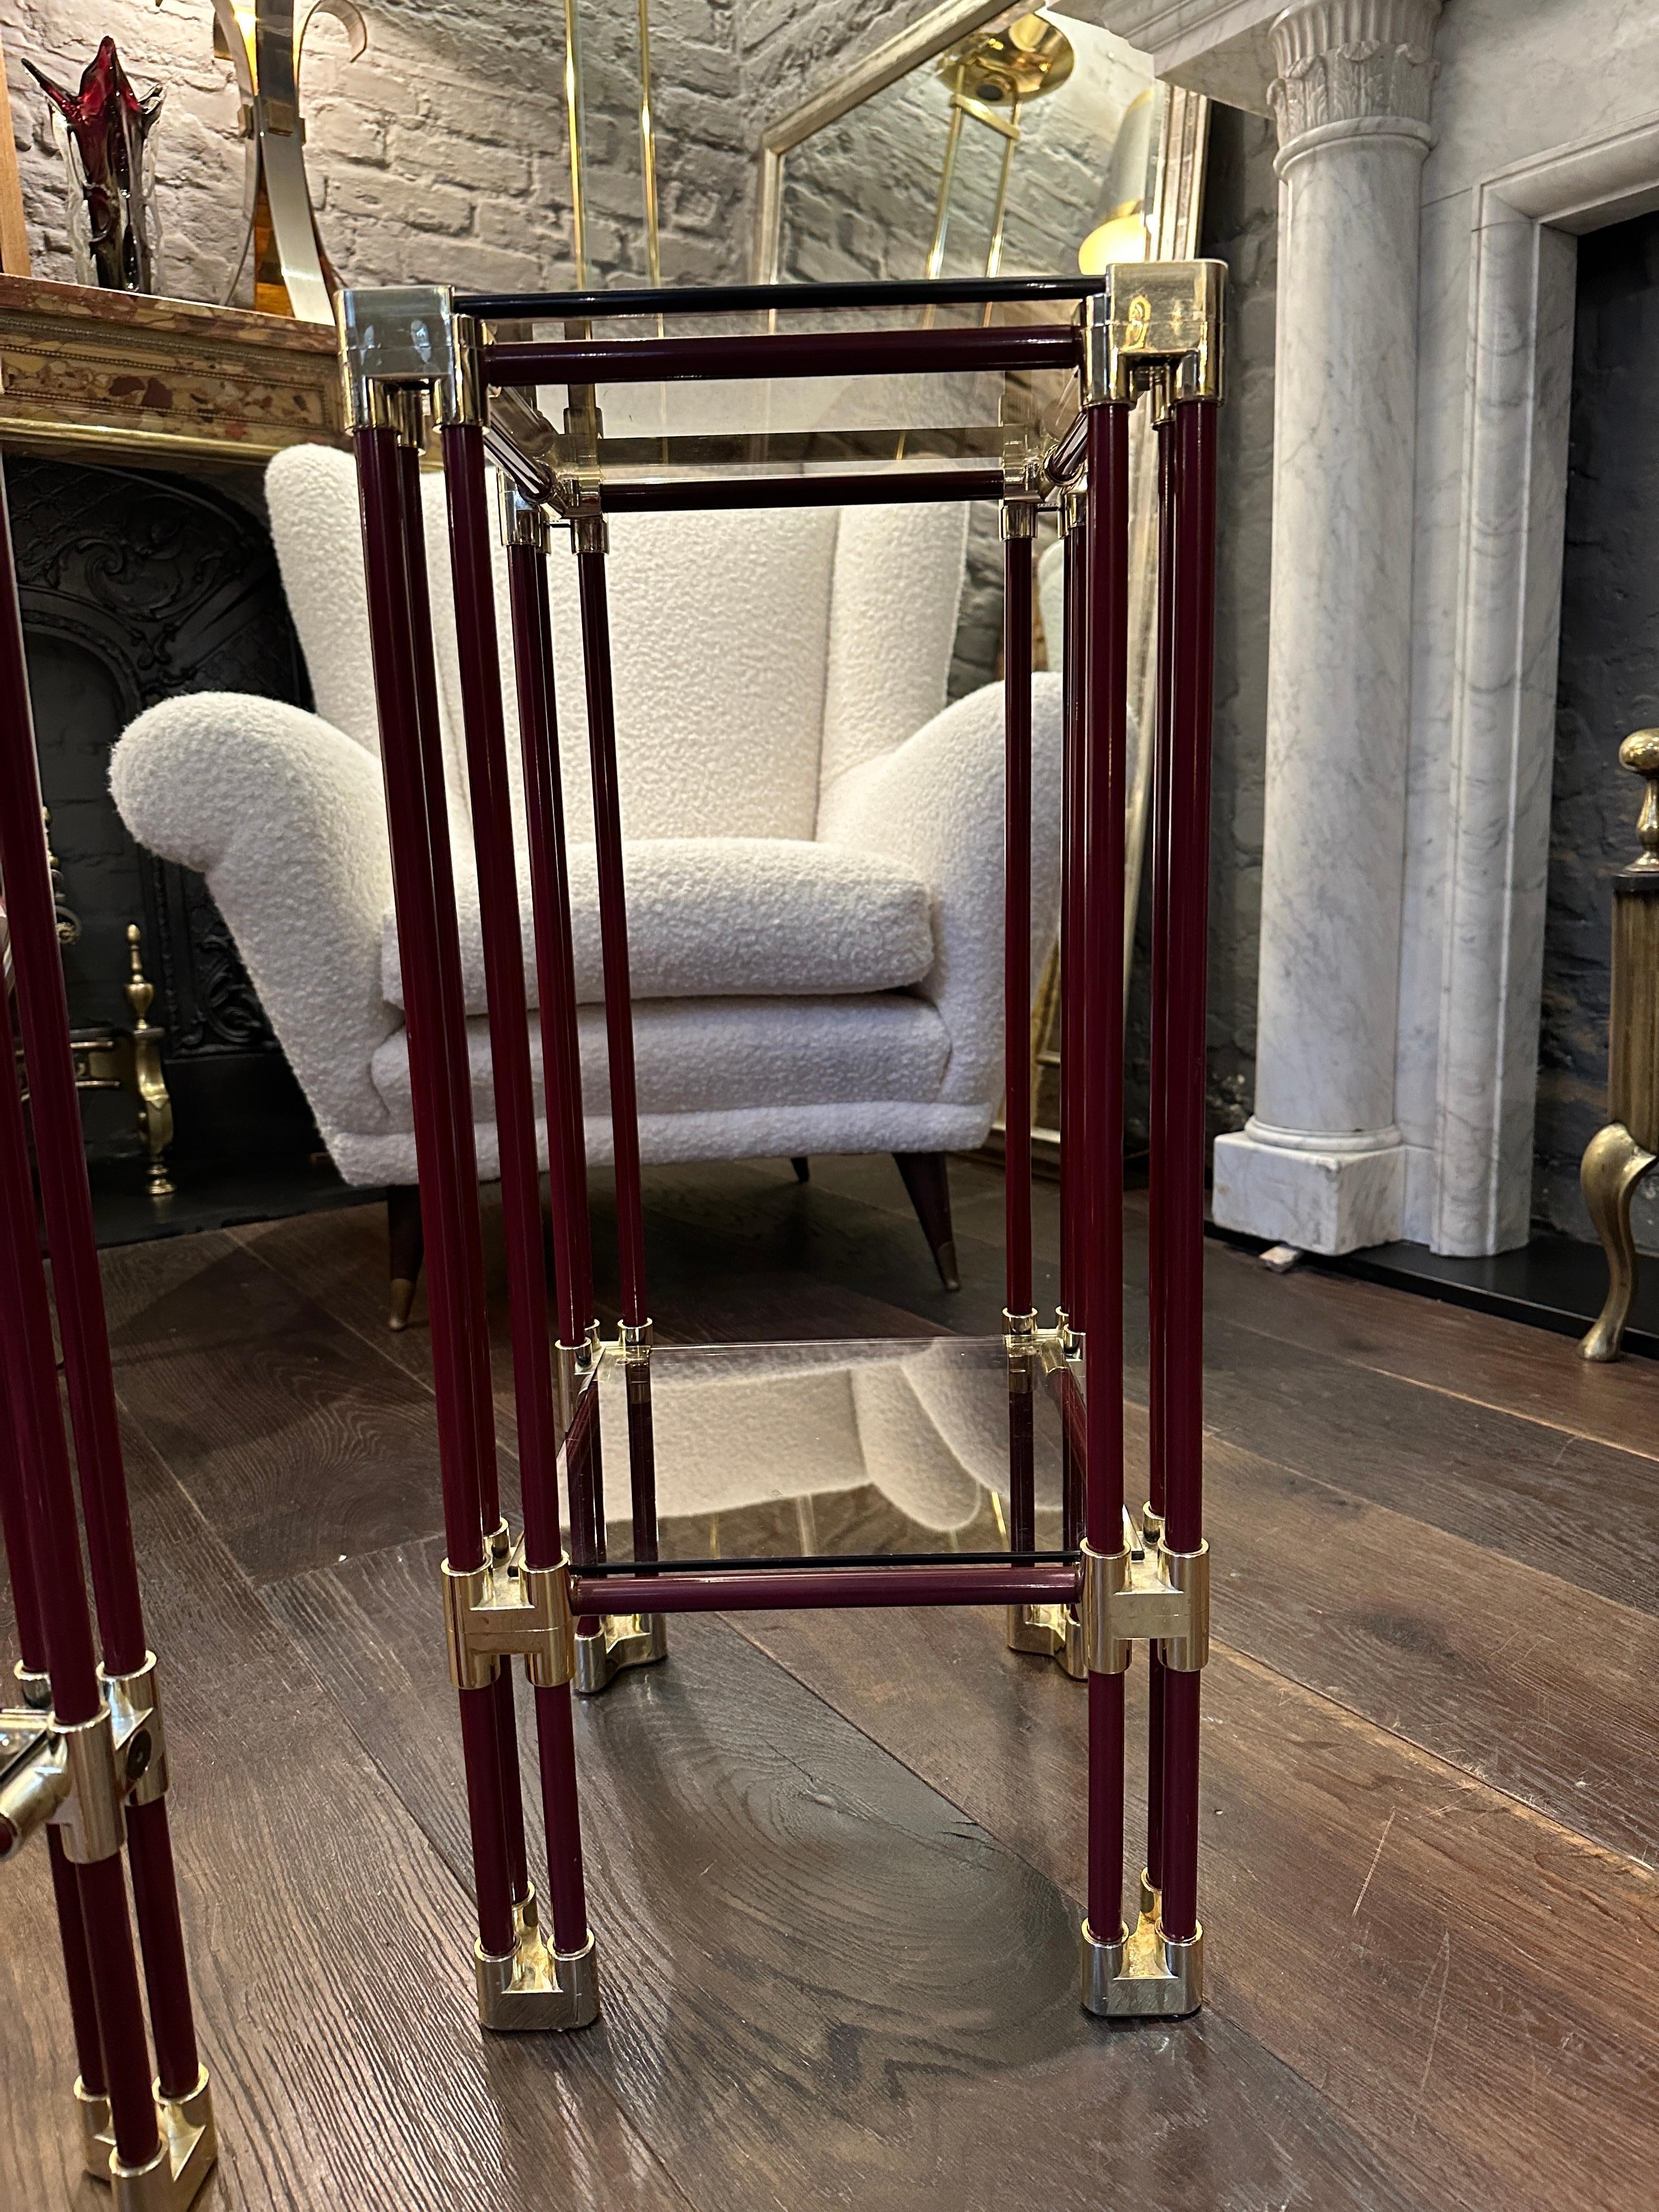 A pair of French tall two tier side or end tables, in lacquered burgundy or deep red colour with brass supports and accents. Original Smoked glass tops which are sunken into frames. 